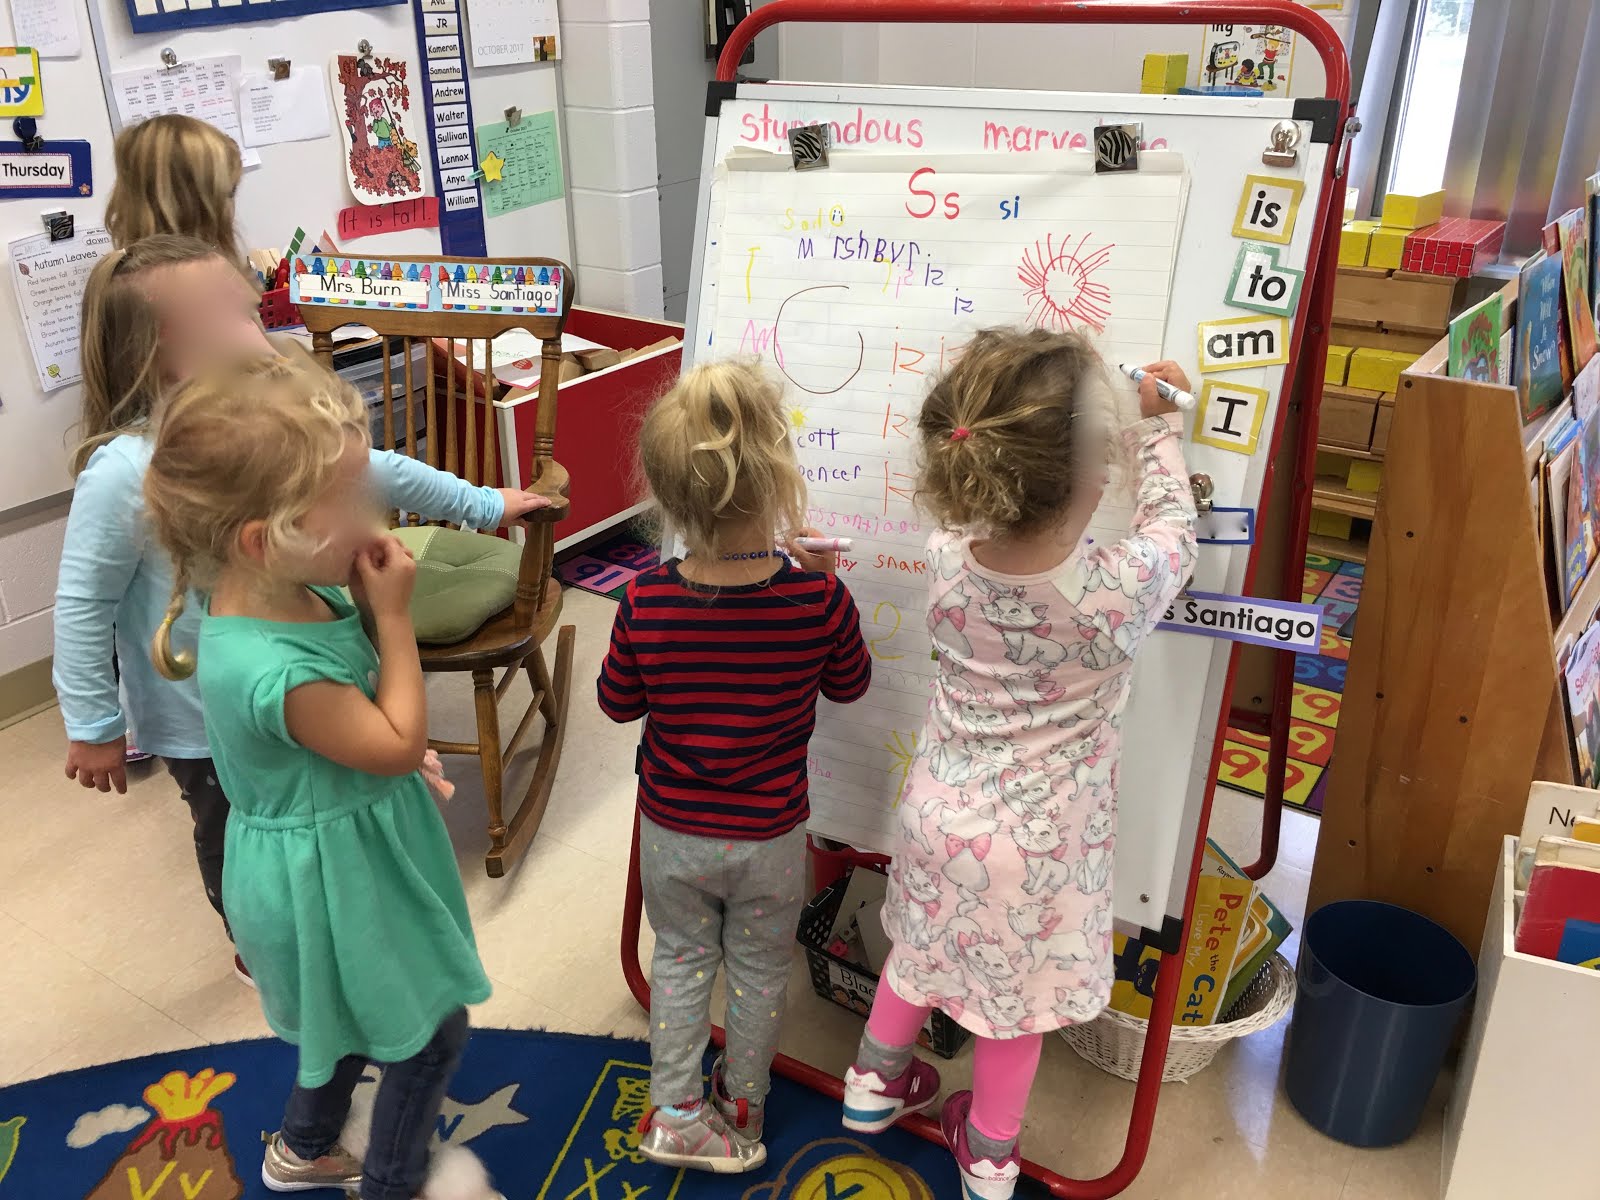 Working to together to write "s" words